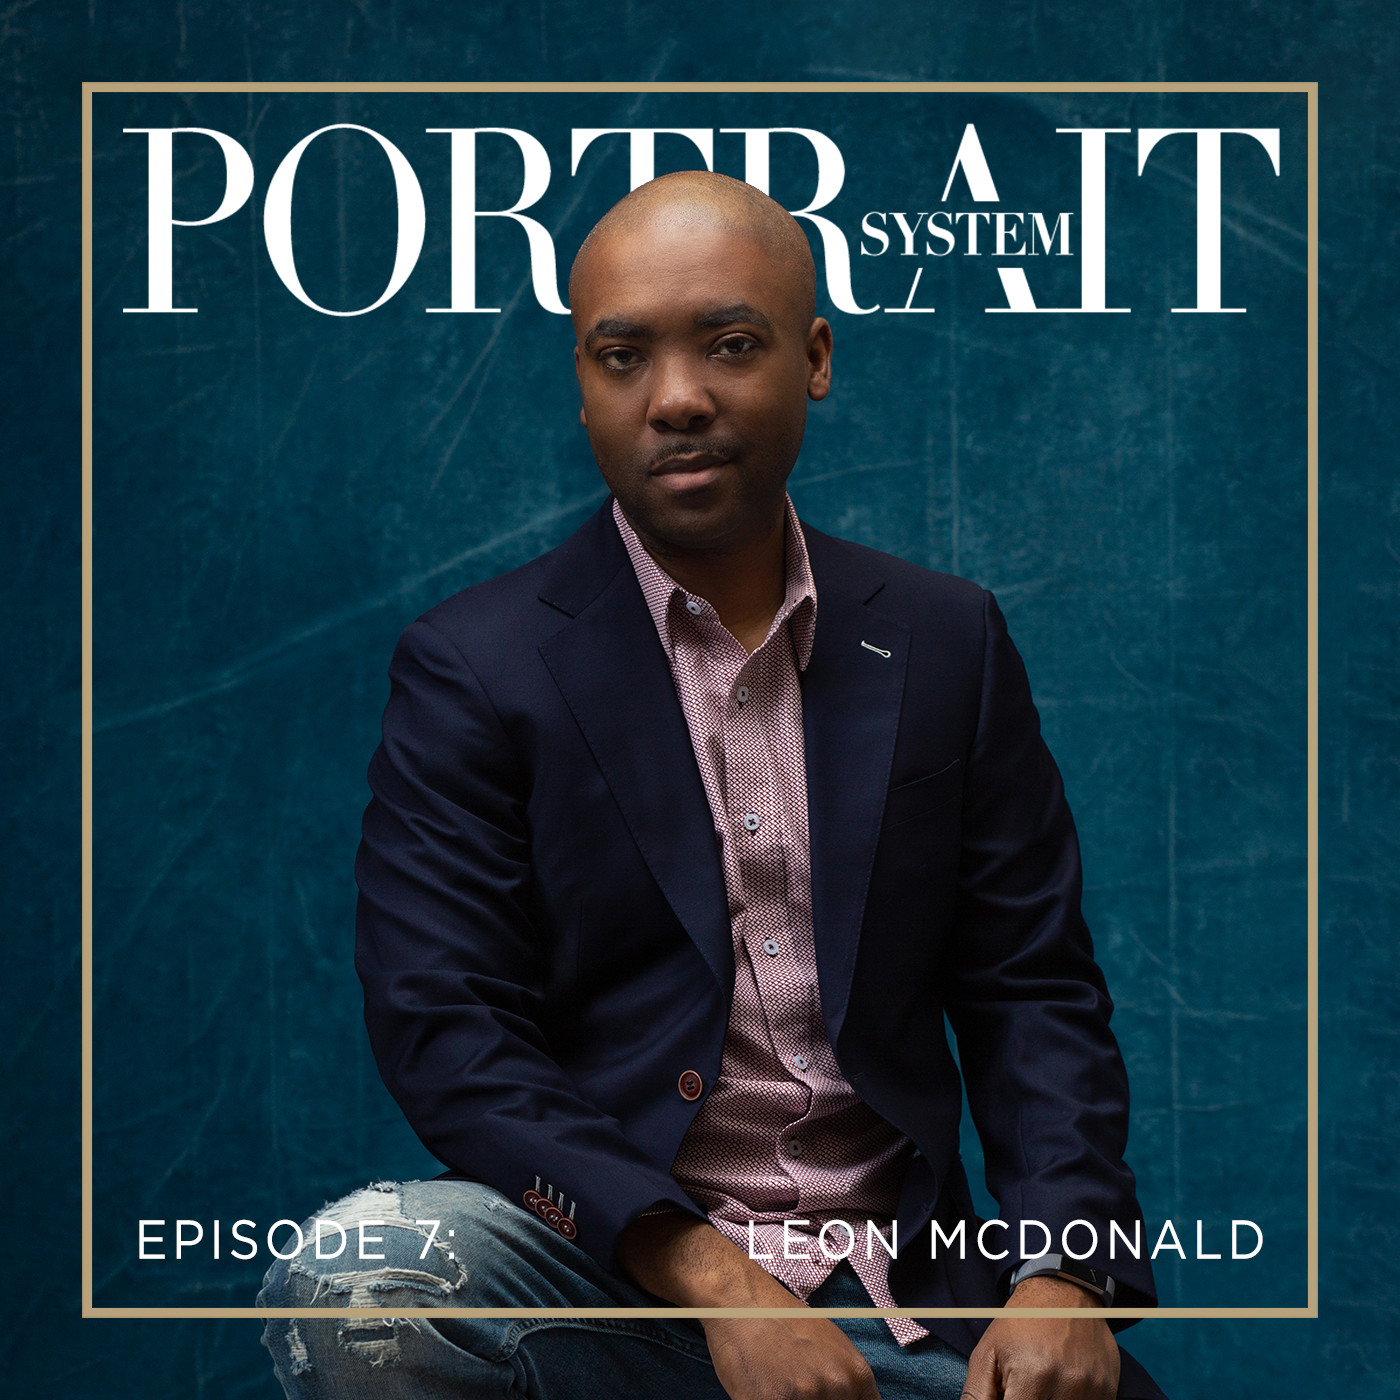 Hobbyist to Profitable Photographer, Conquering Fears to Find Success with Leon McDonald